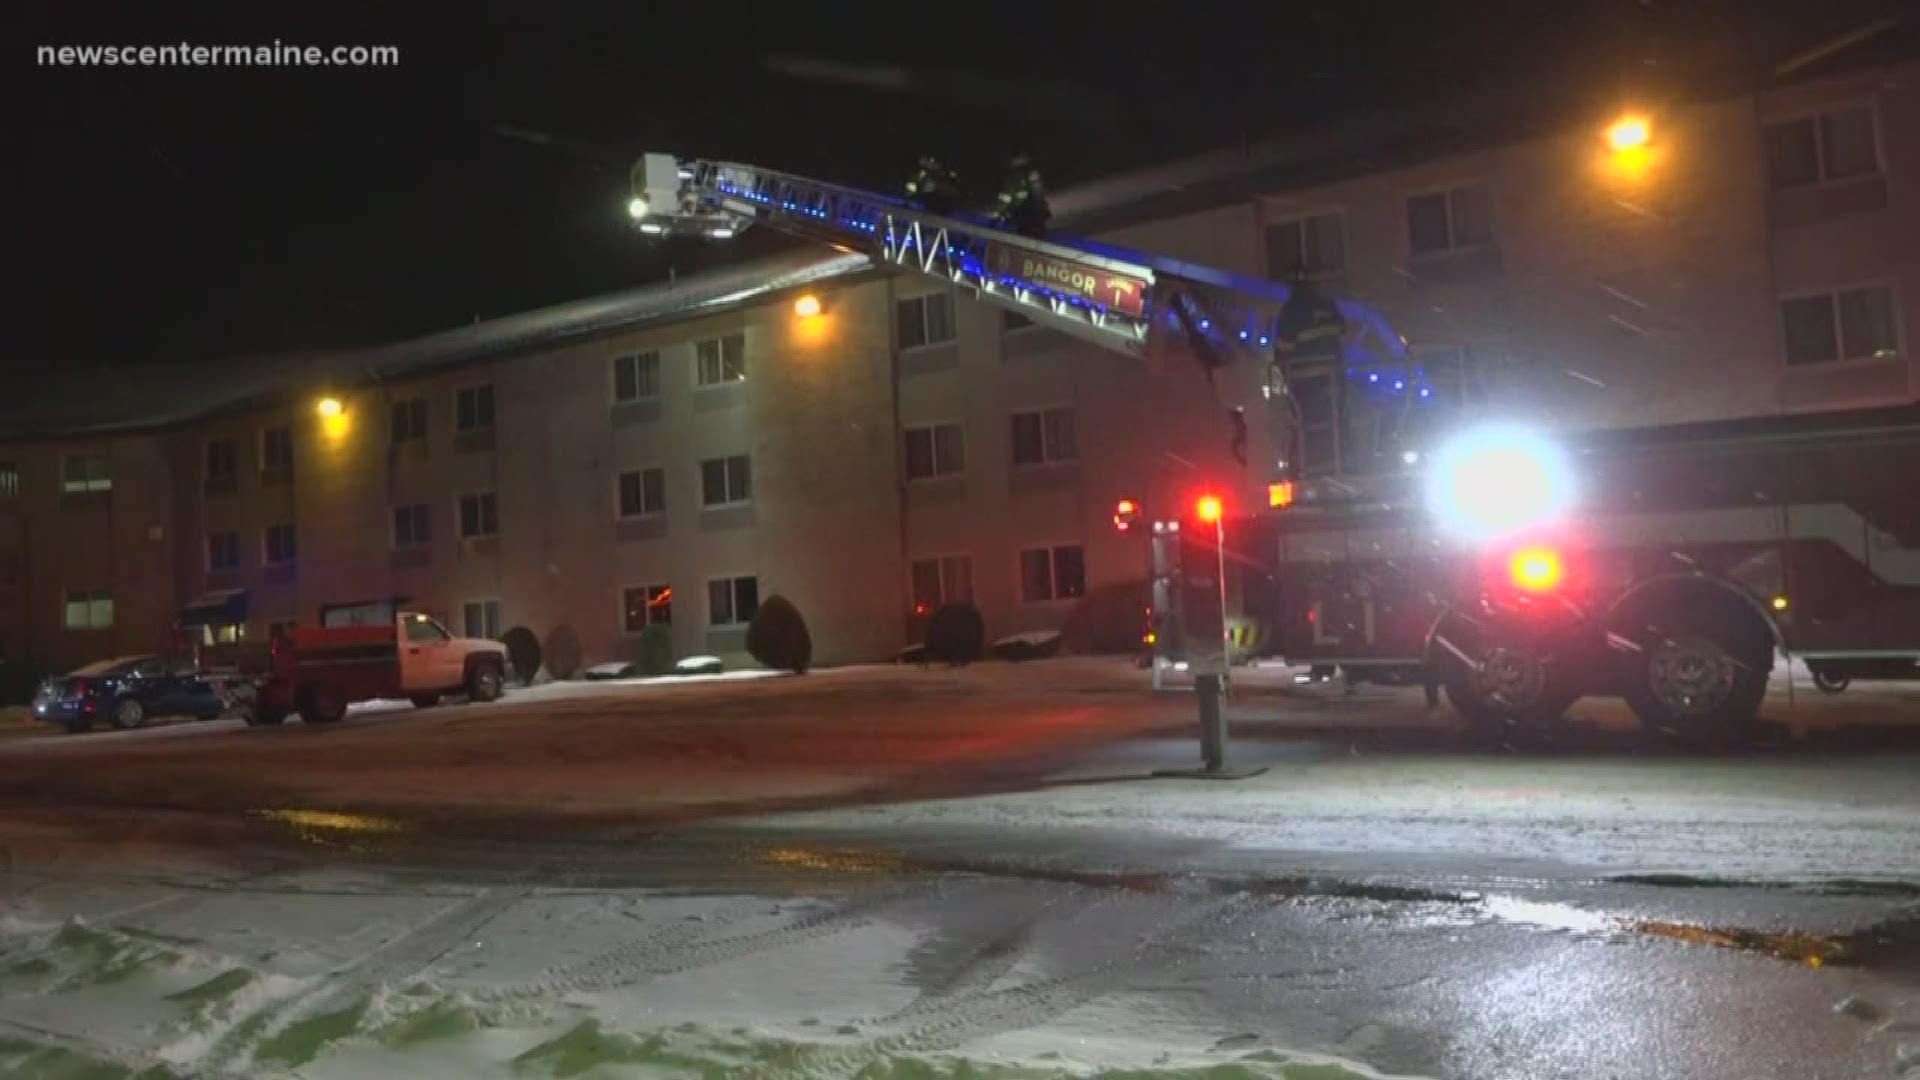 Fifty people had to find another place to stay after a fire at the Comfort Inn hotel in Bangor.